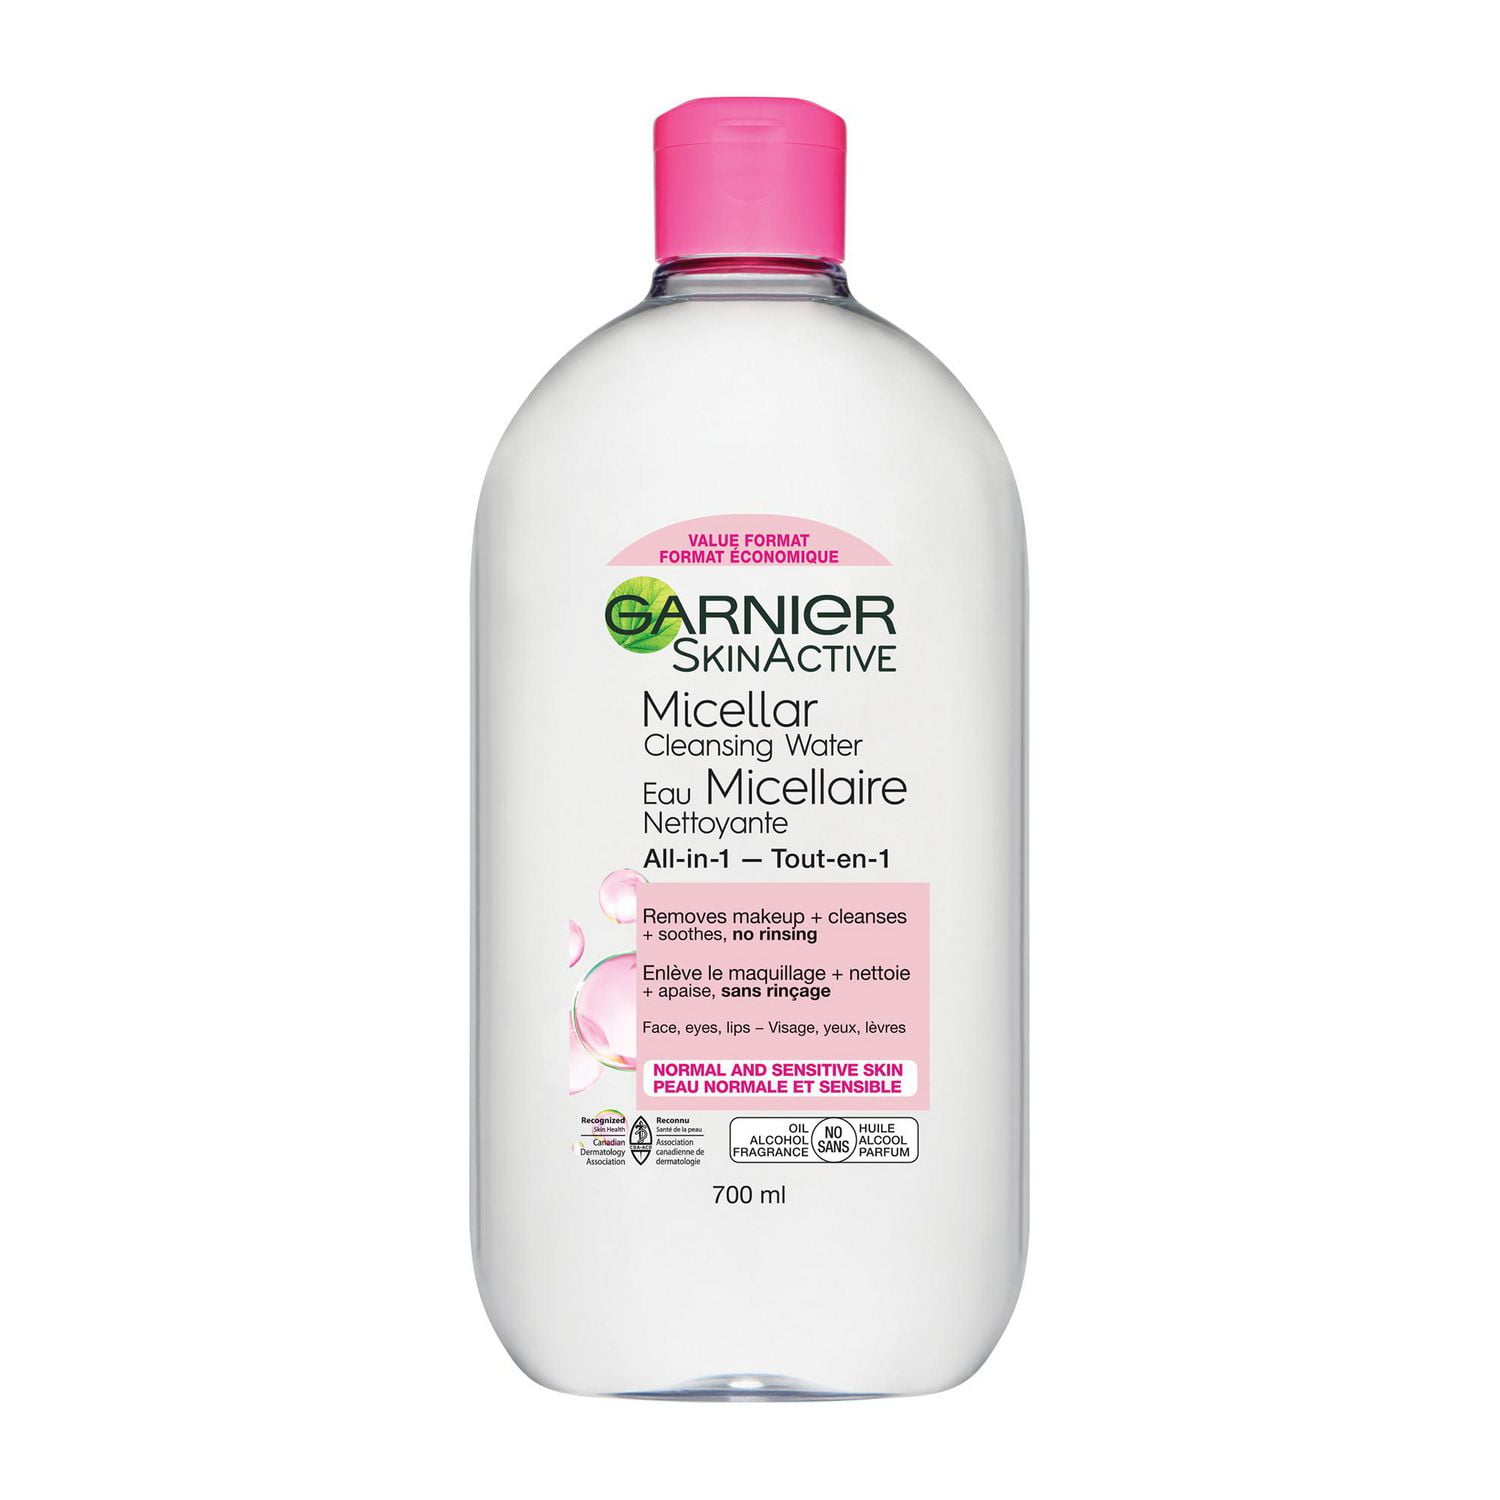 Garnier Skinactive All-In-1 Micellar Cleansing Water For All Skin Types,  Even Sensitive, 700 mL, Makeup Remover & Cleanser - Walmart.ca